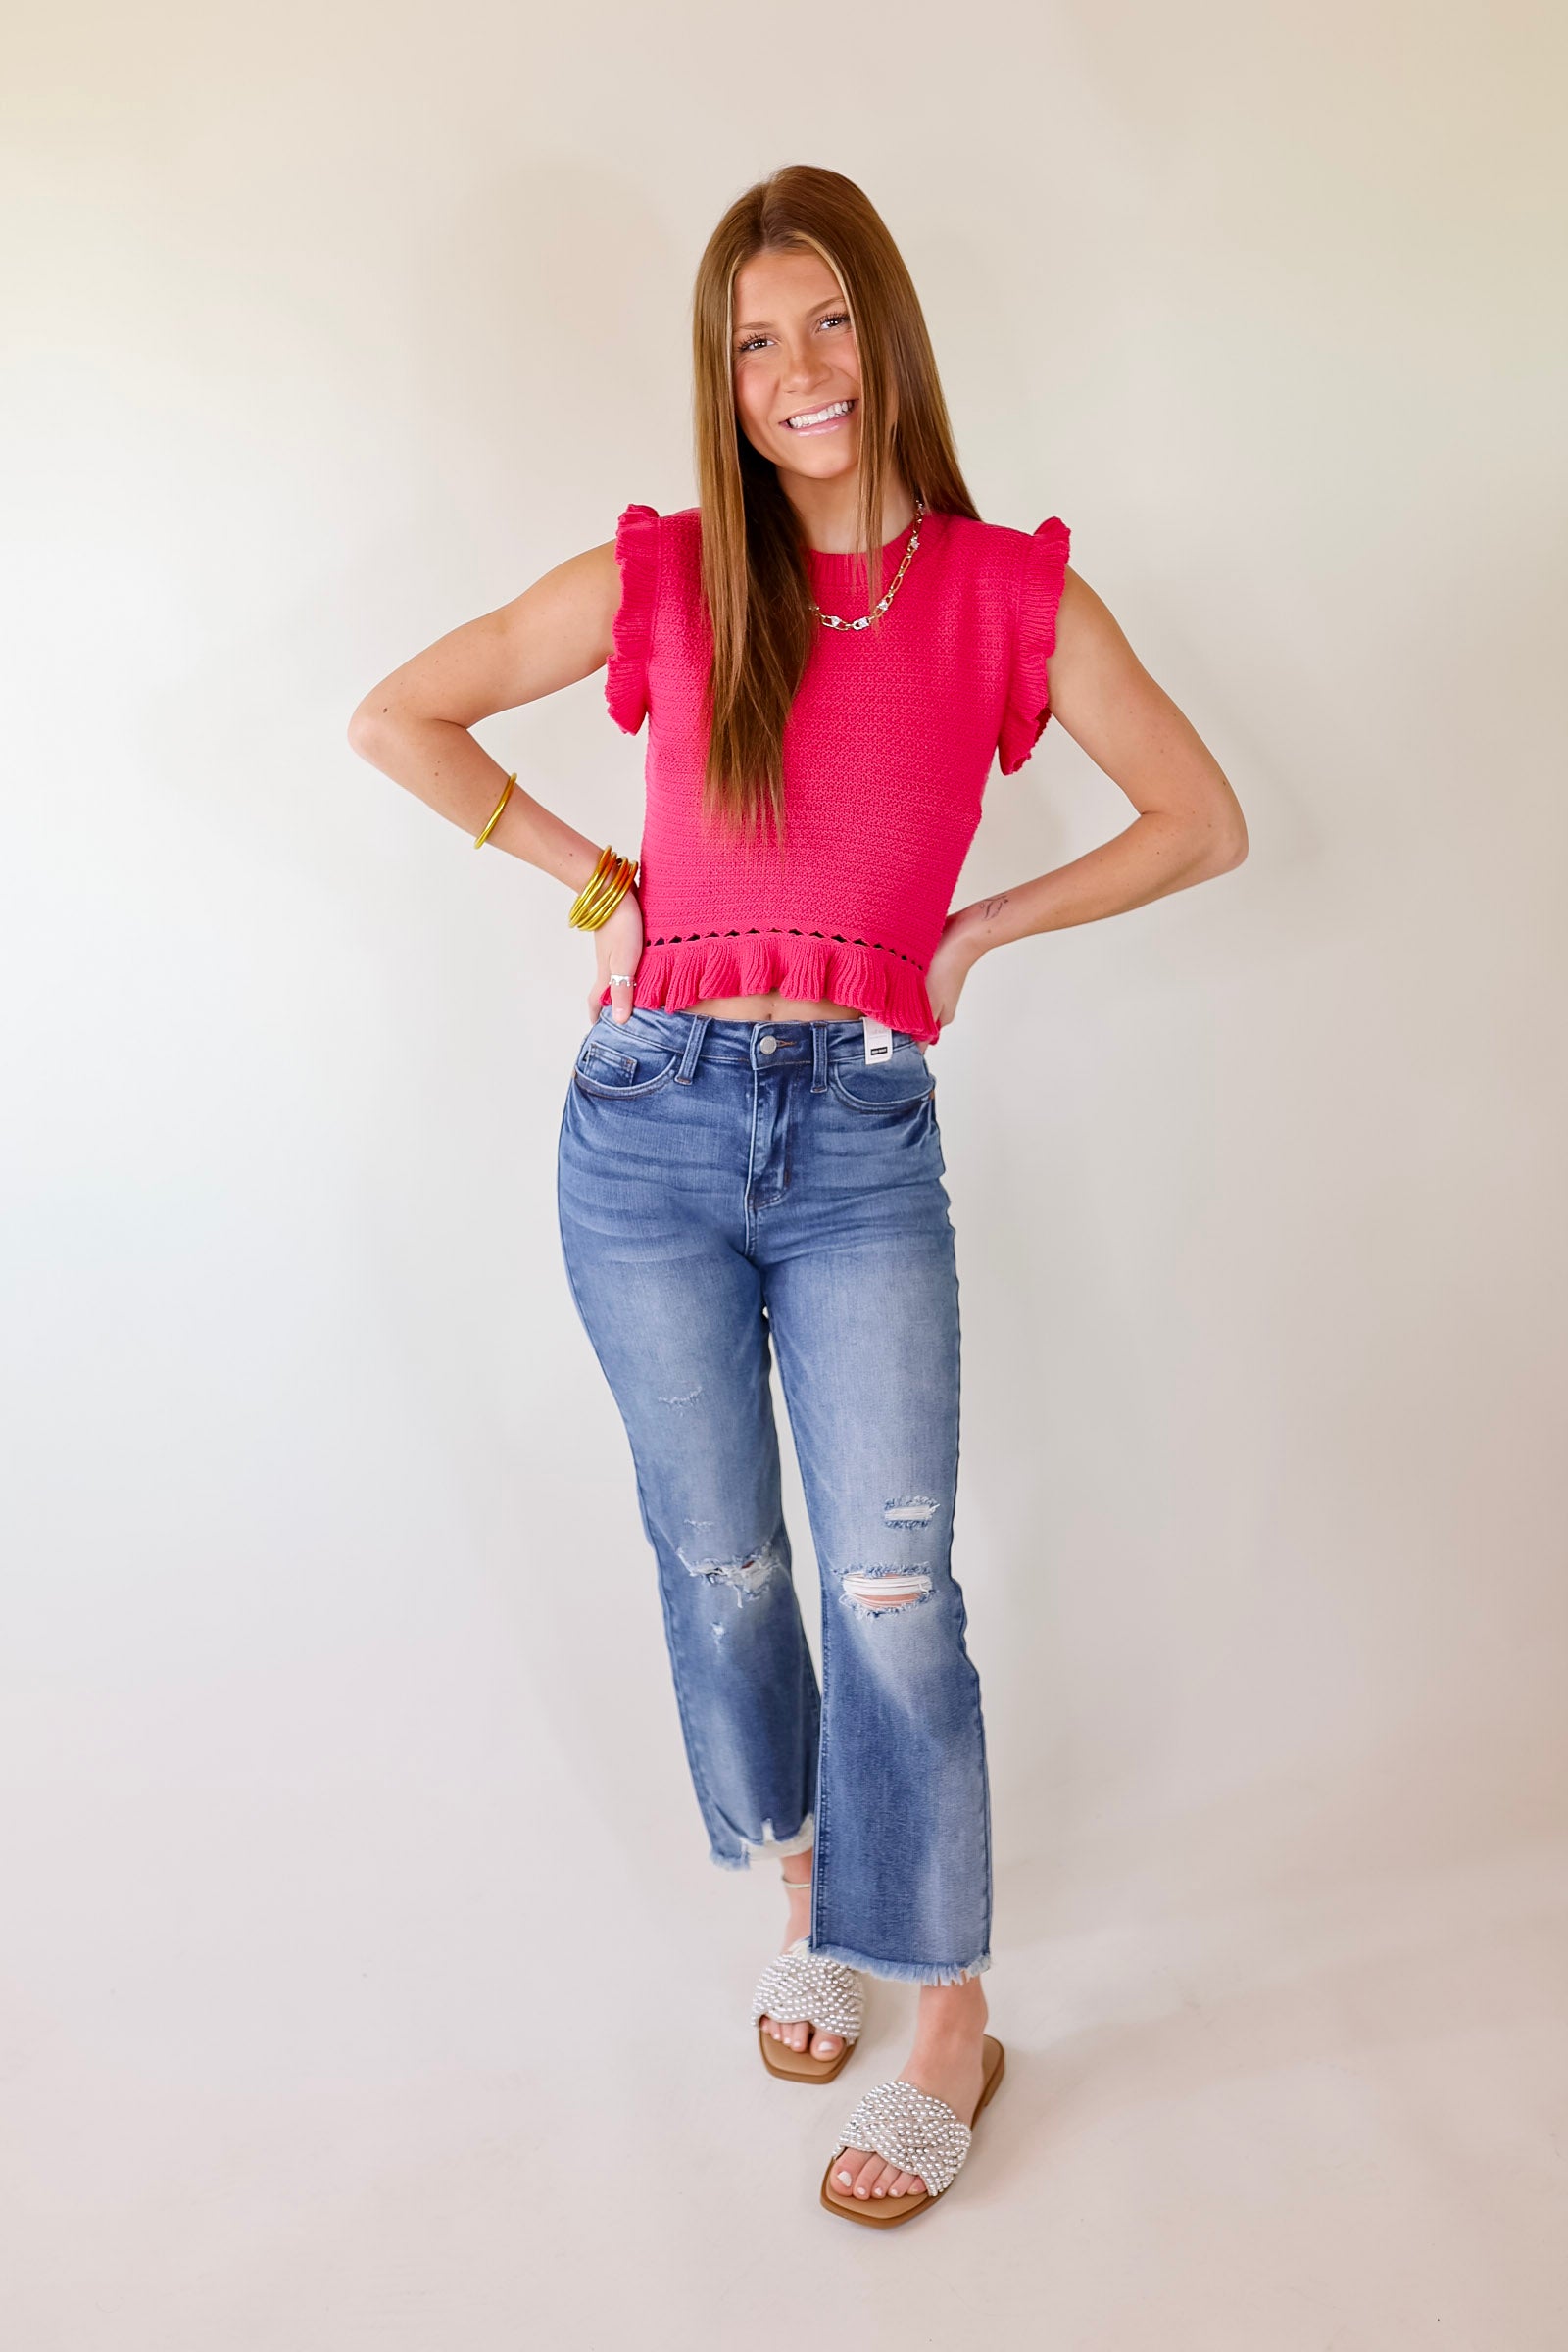 Breezy Baby Cropped Sweater with Ruffle Cap Sleeves in Hot Pink - Giddy Up Glamour Boutique